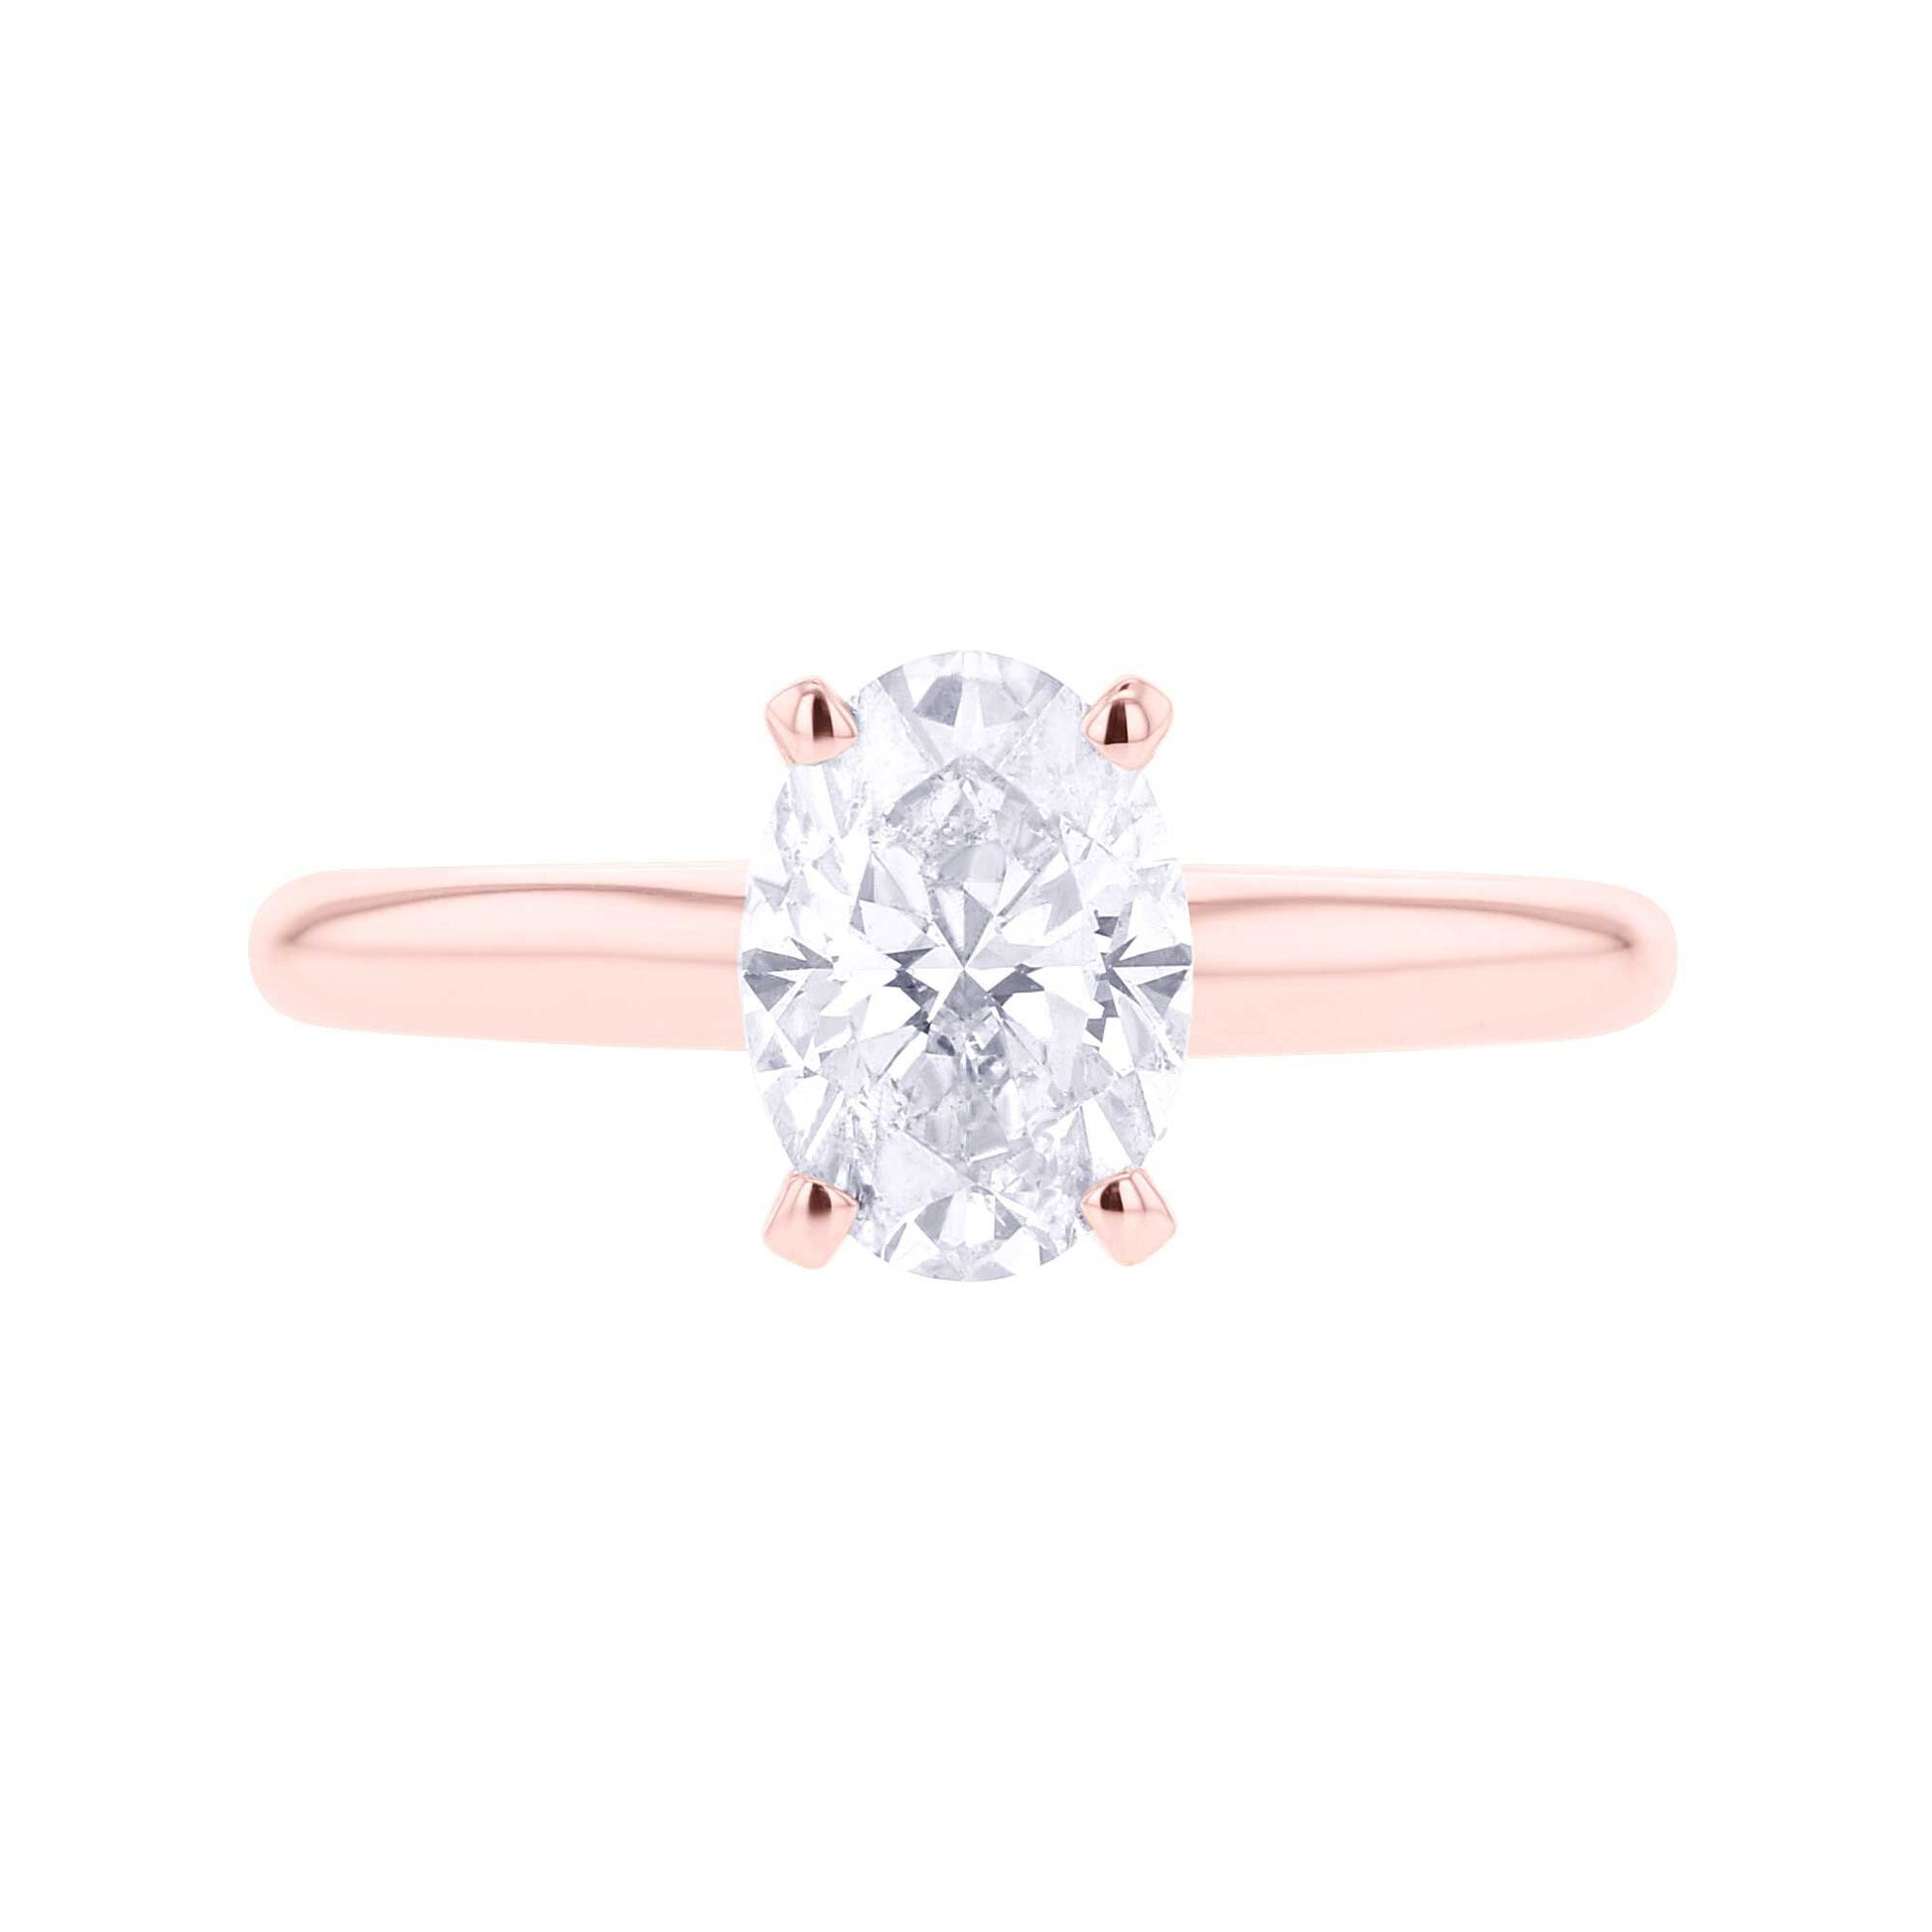 Christa Oval Ready for Love Diamond Engagement Ring 1ct